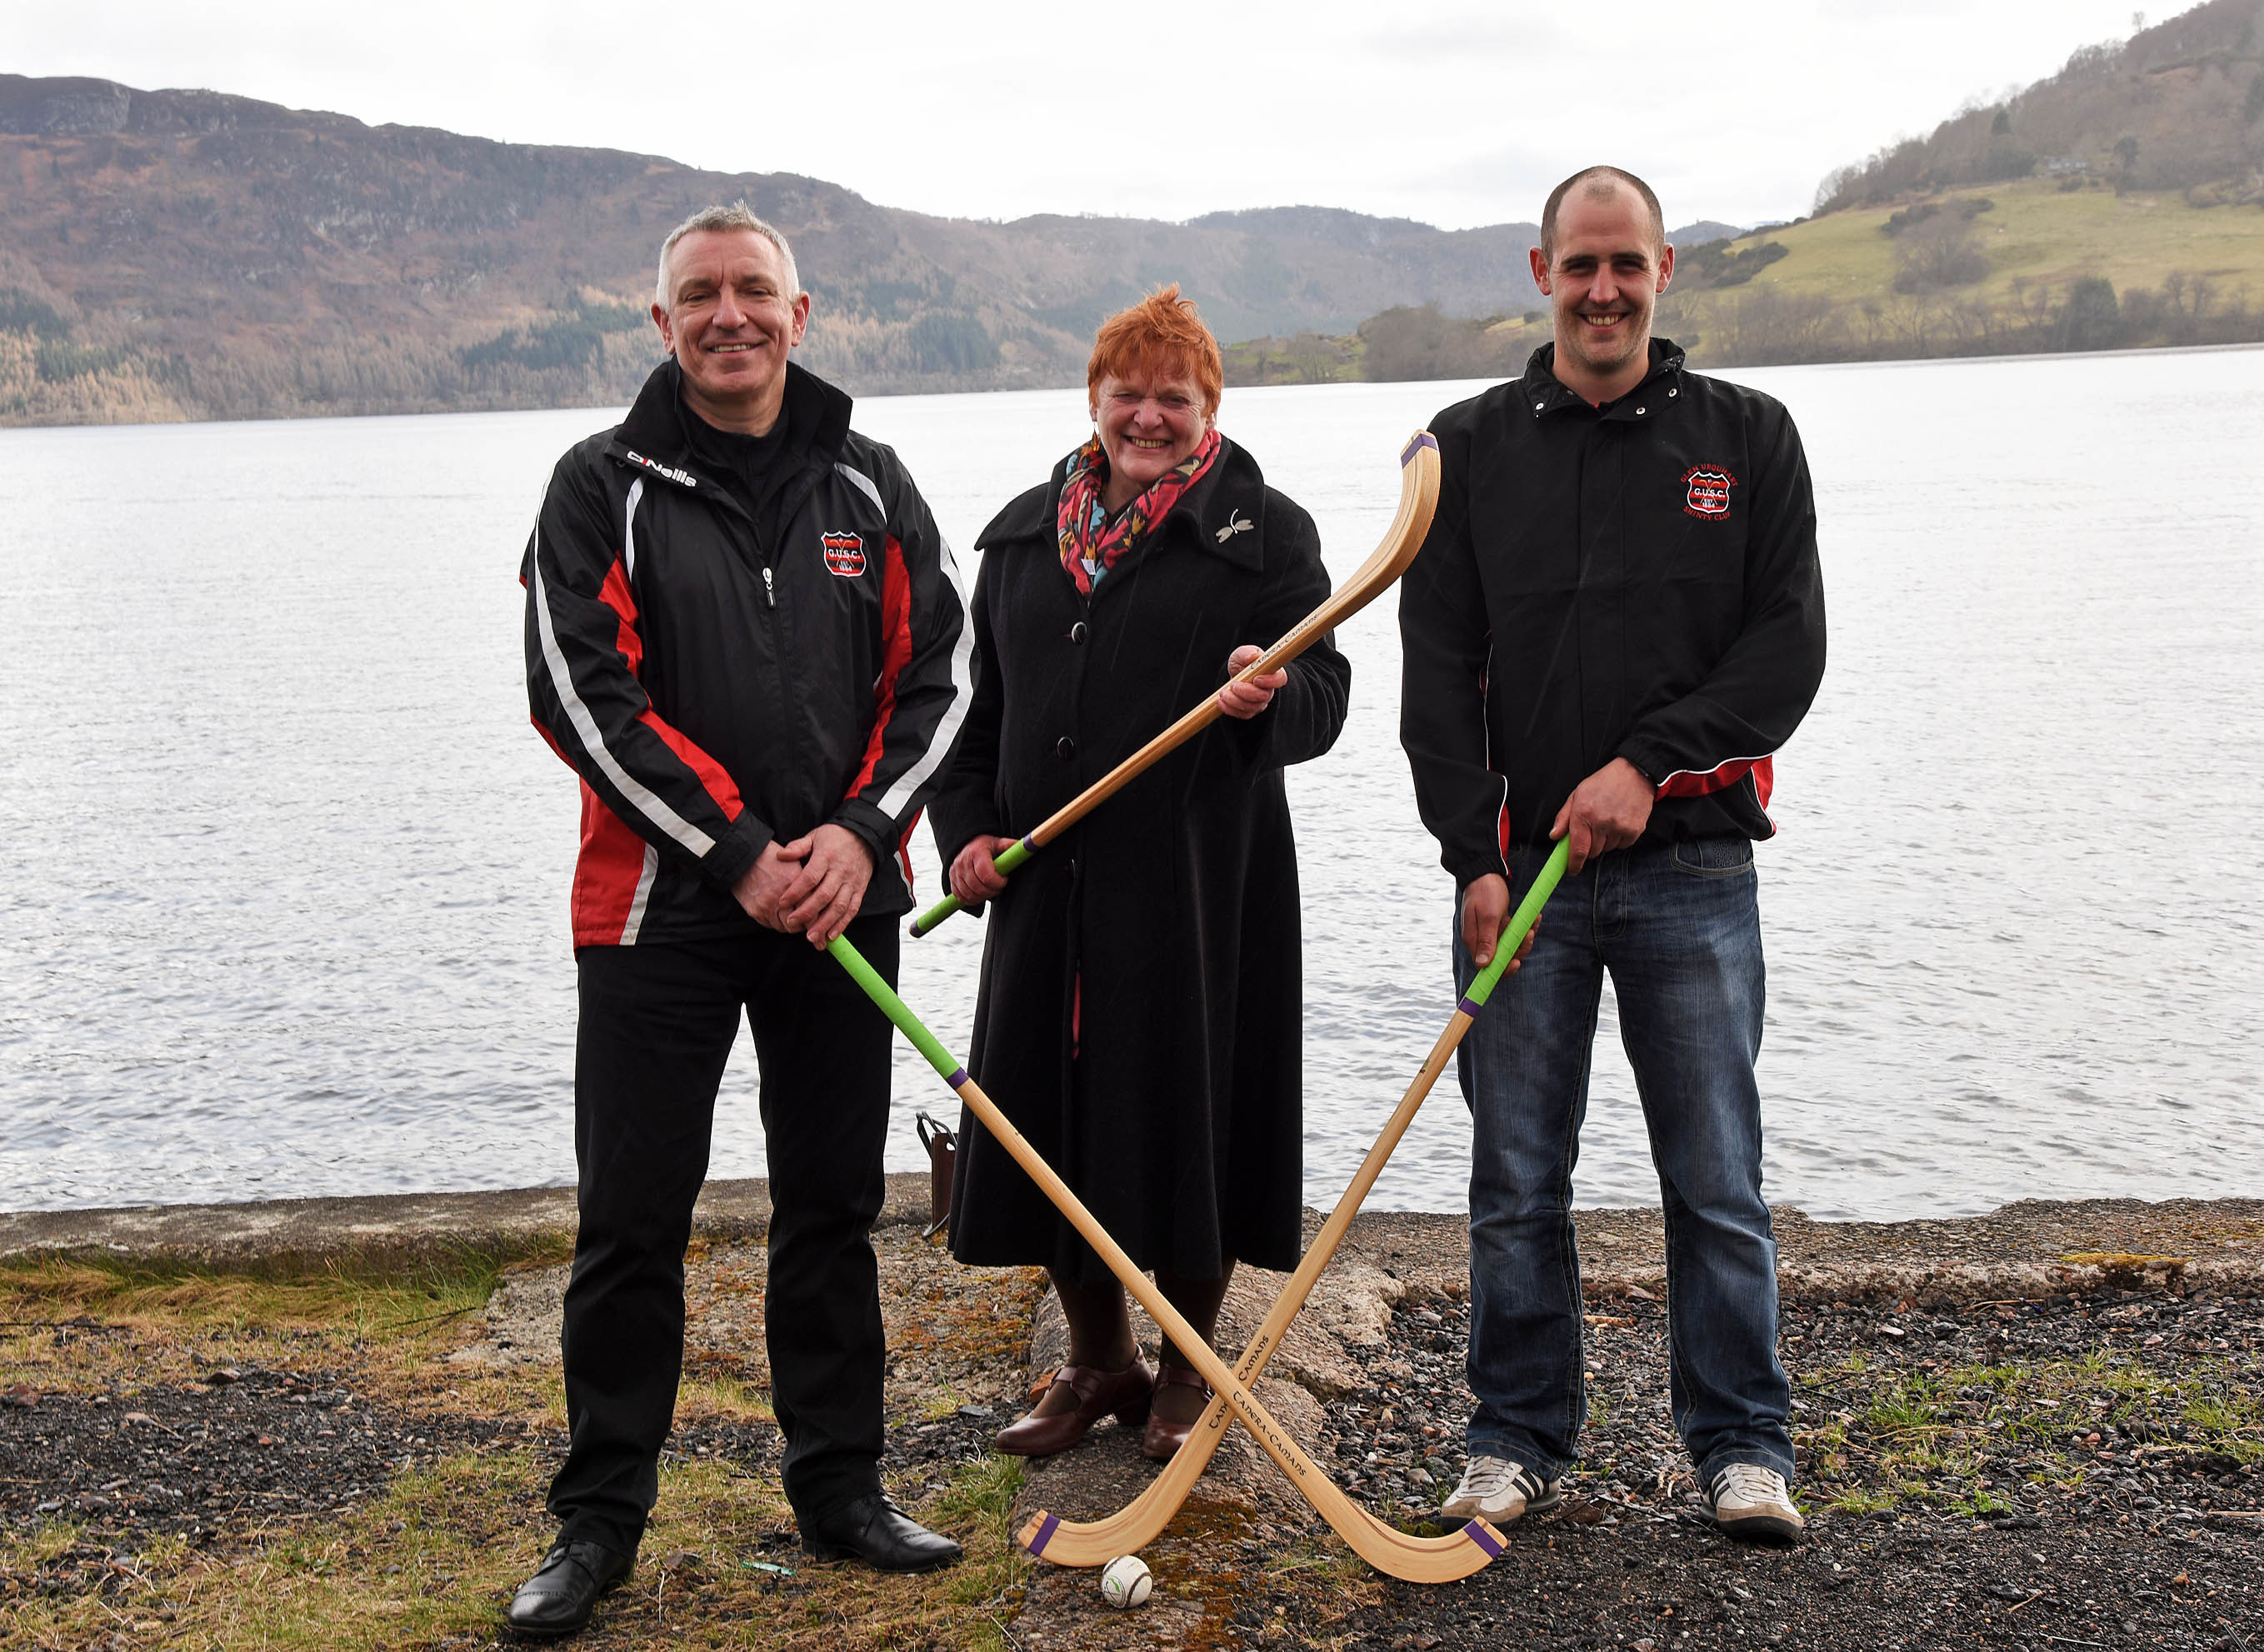 Cllr Margaret Davidson (centre) with Billy MacLean (left) and Lewis MacLennan of Glenurquhart Shinty Club. Picture by Phil Dwnie